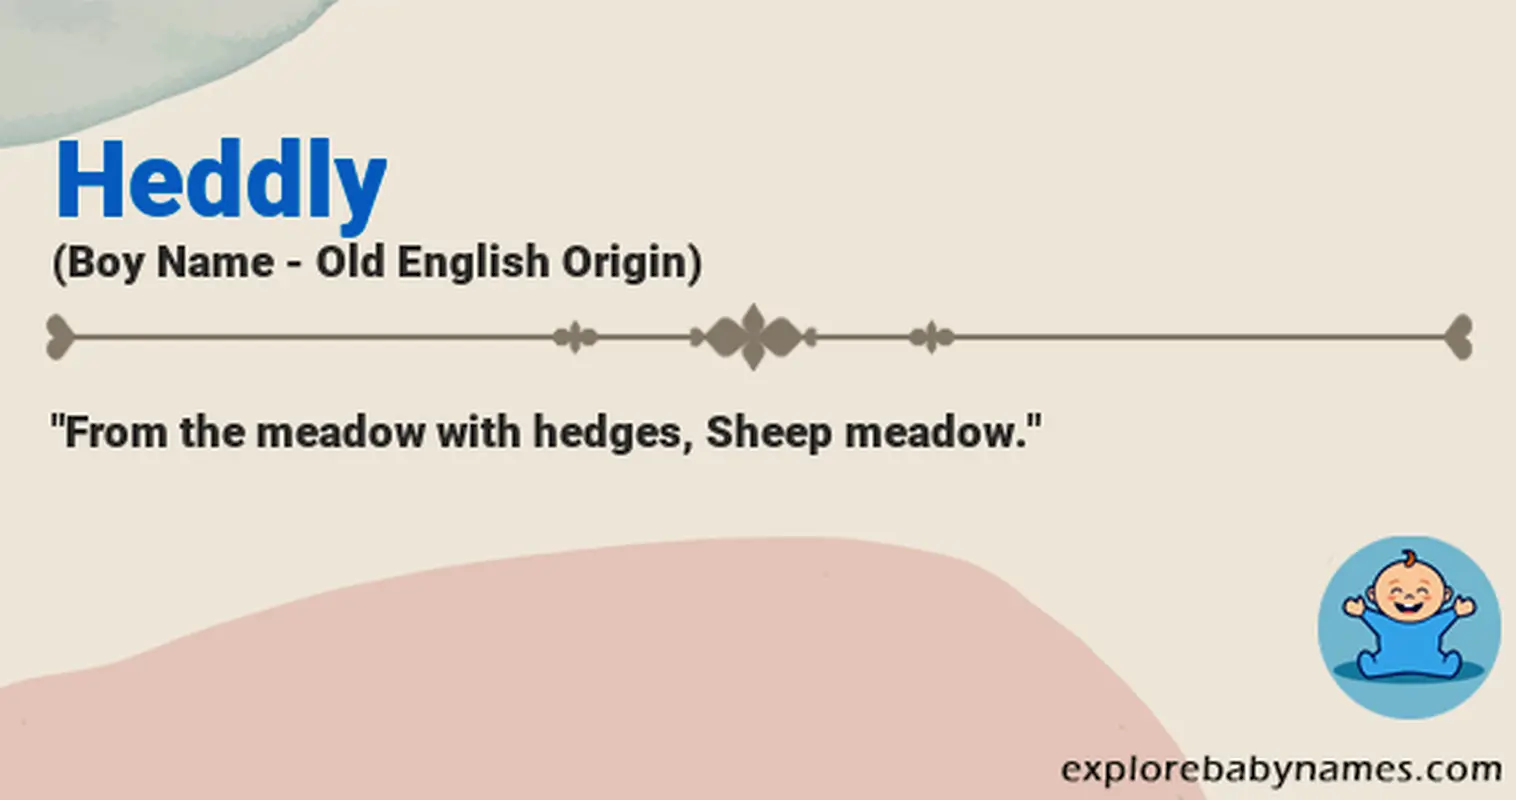 Meaning of Heddly